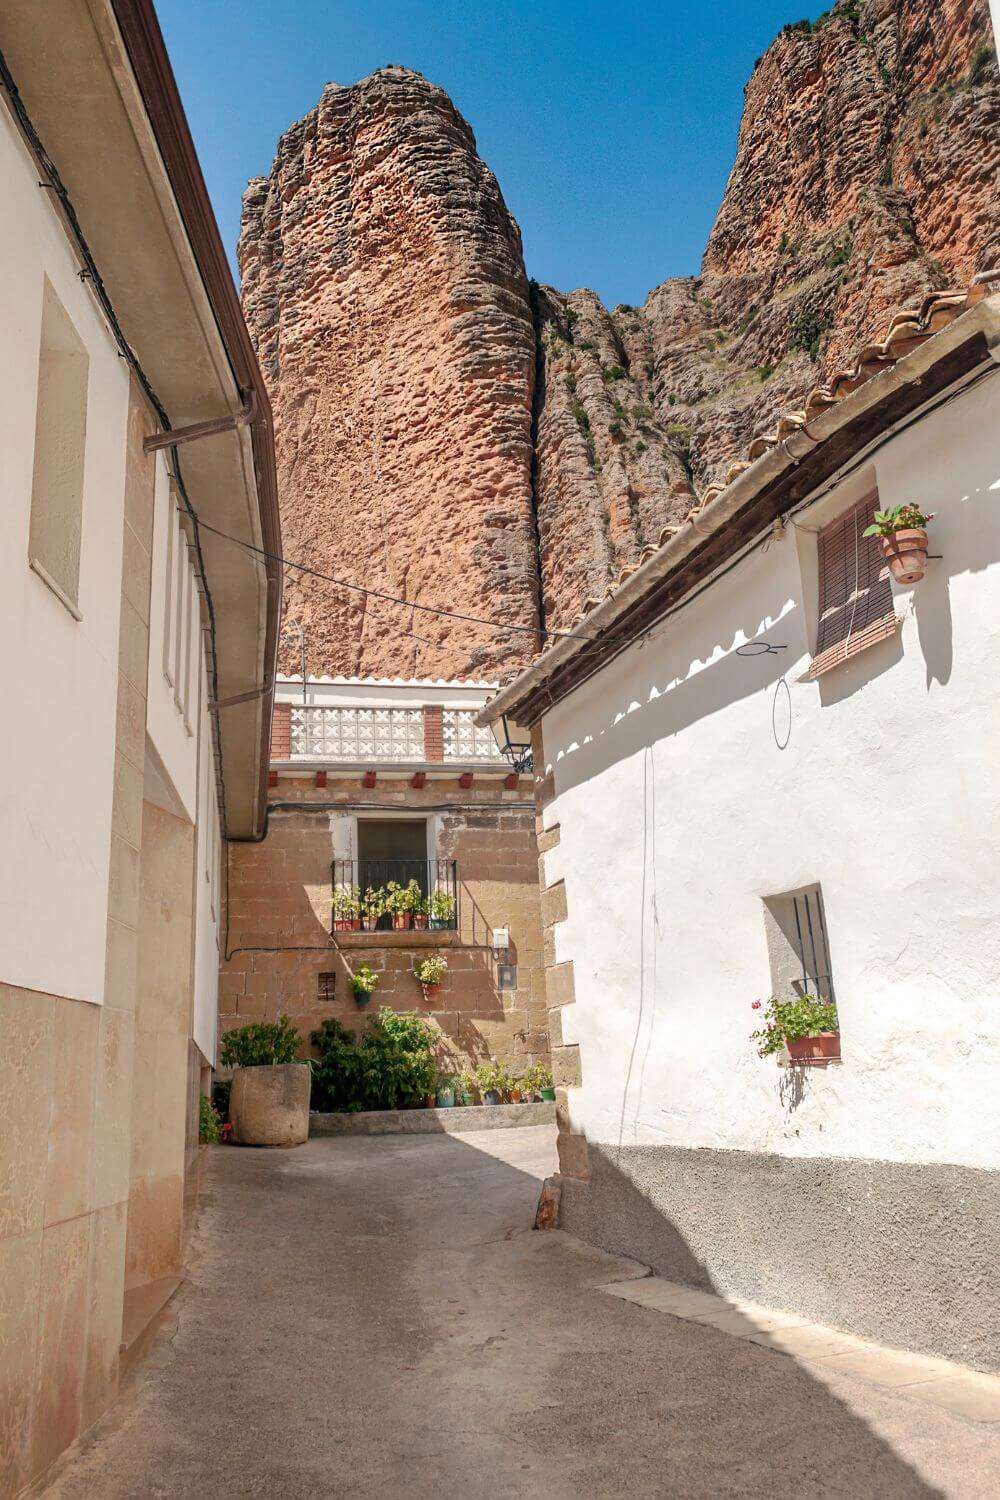 Cities in Spain are perfect for rainy days Riglos Huesca